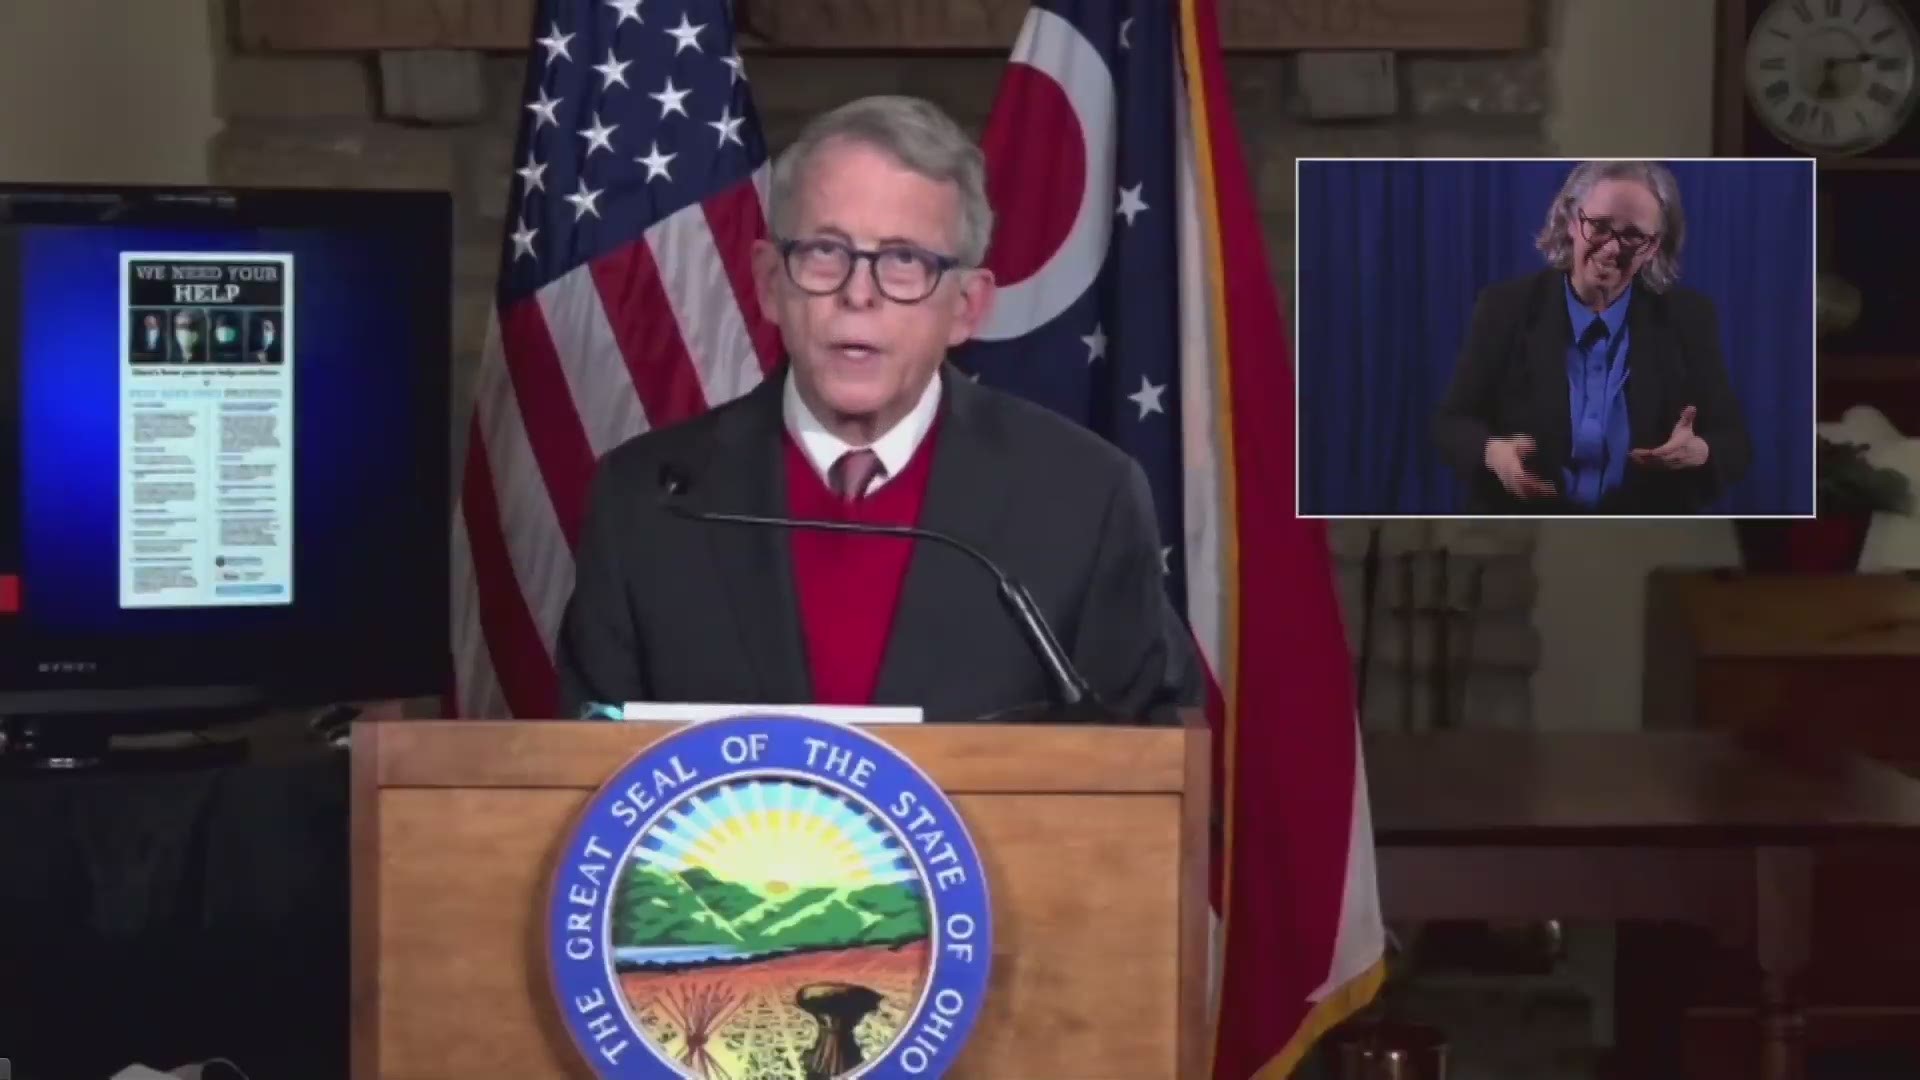 On Wednesday, Ohio Governor Mike DeWine announced who will be next to receive the coronavirus vaccine in Ohio.